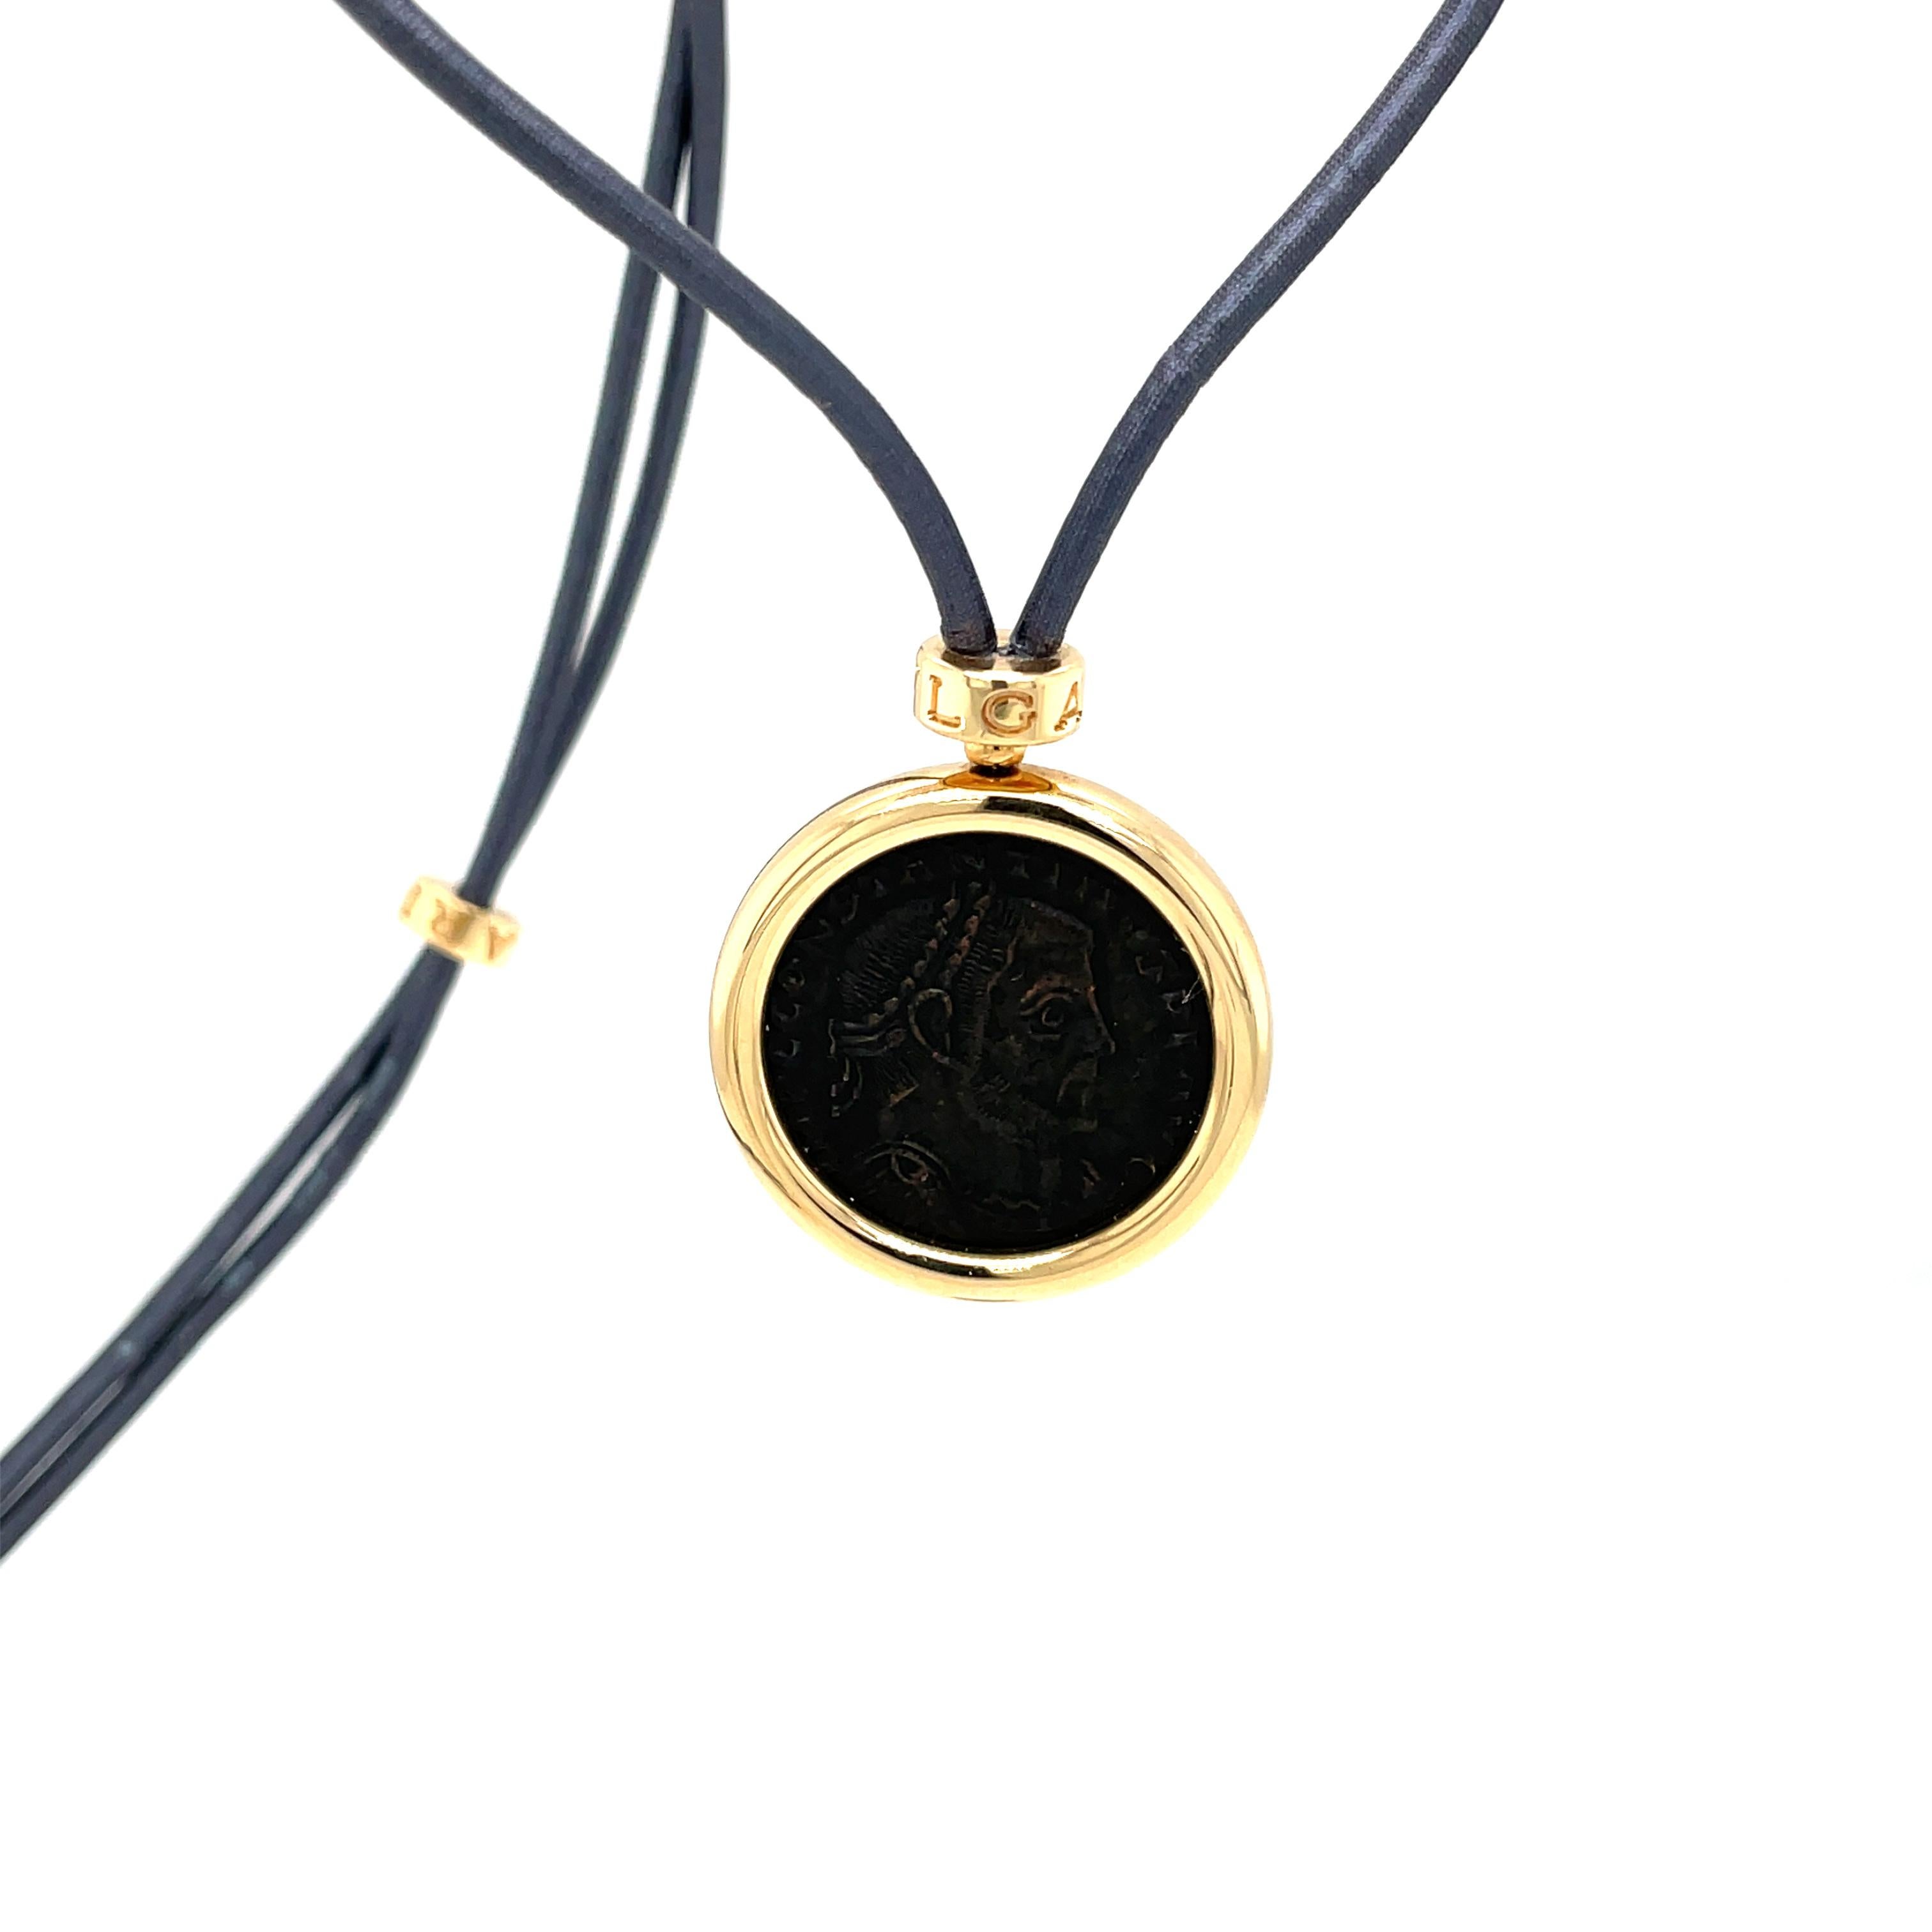 Bulgari Monete Constantinus Coin Black Lace Yellow Gold Pendant Necklace In Excellent Condition For Sale In Napoli, Italy